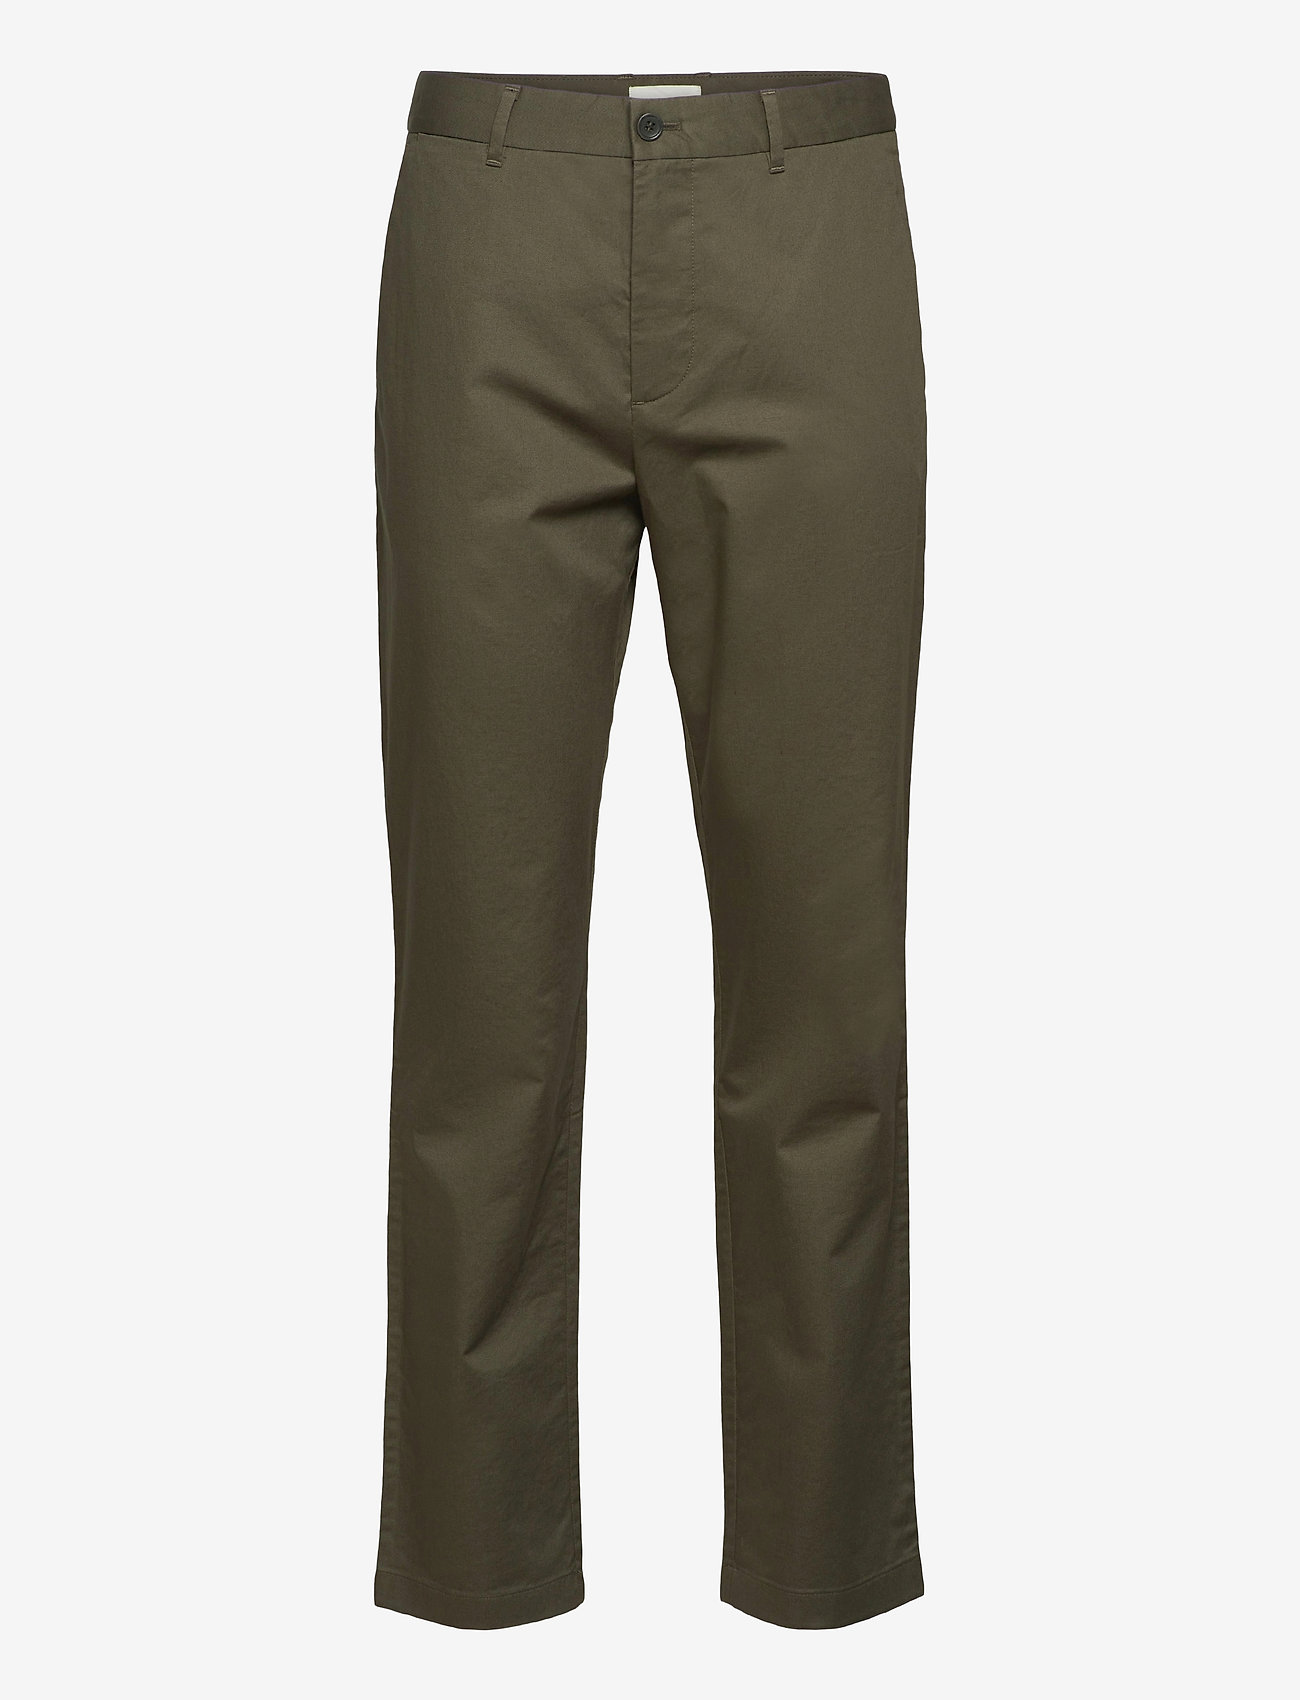 Wood Wood - Marcus light twill trousers - chinos - olive - 0